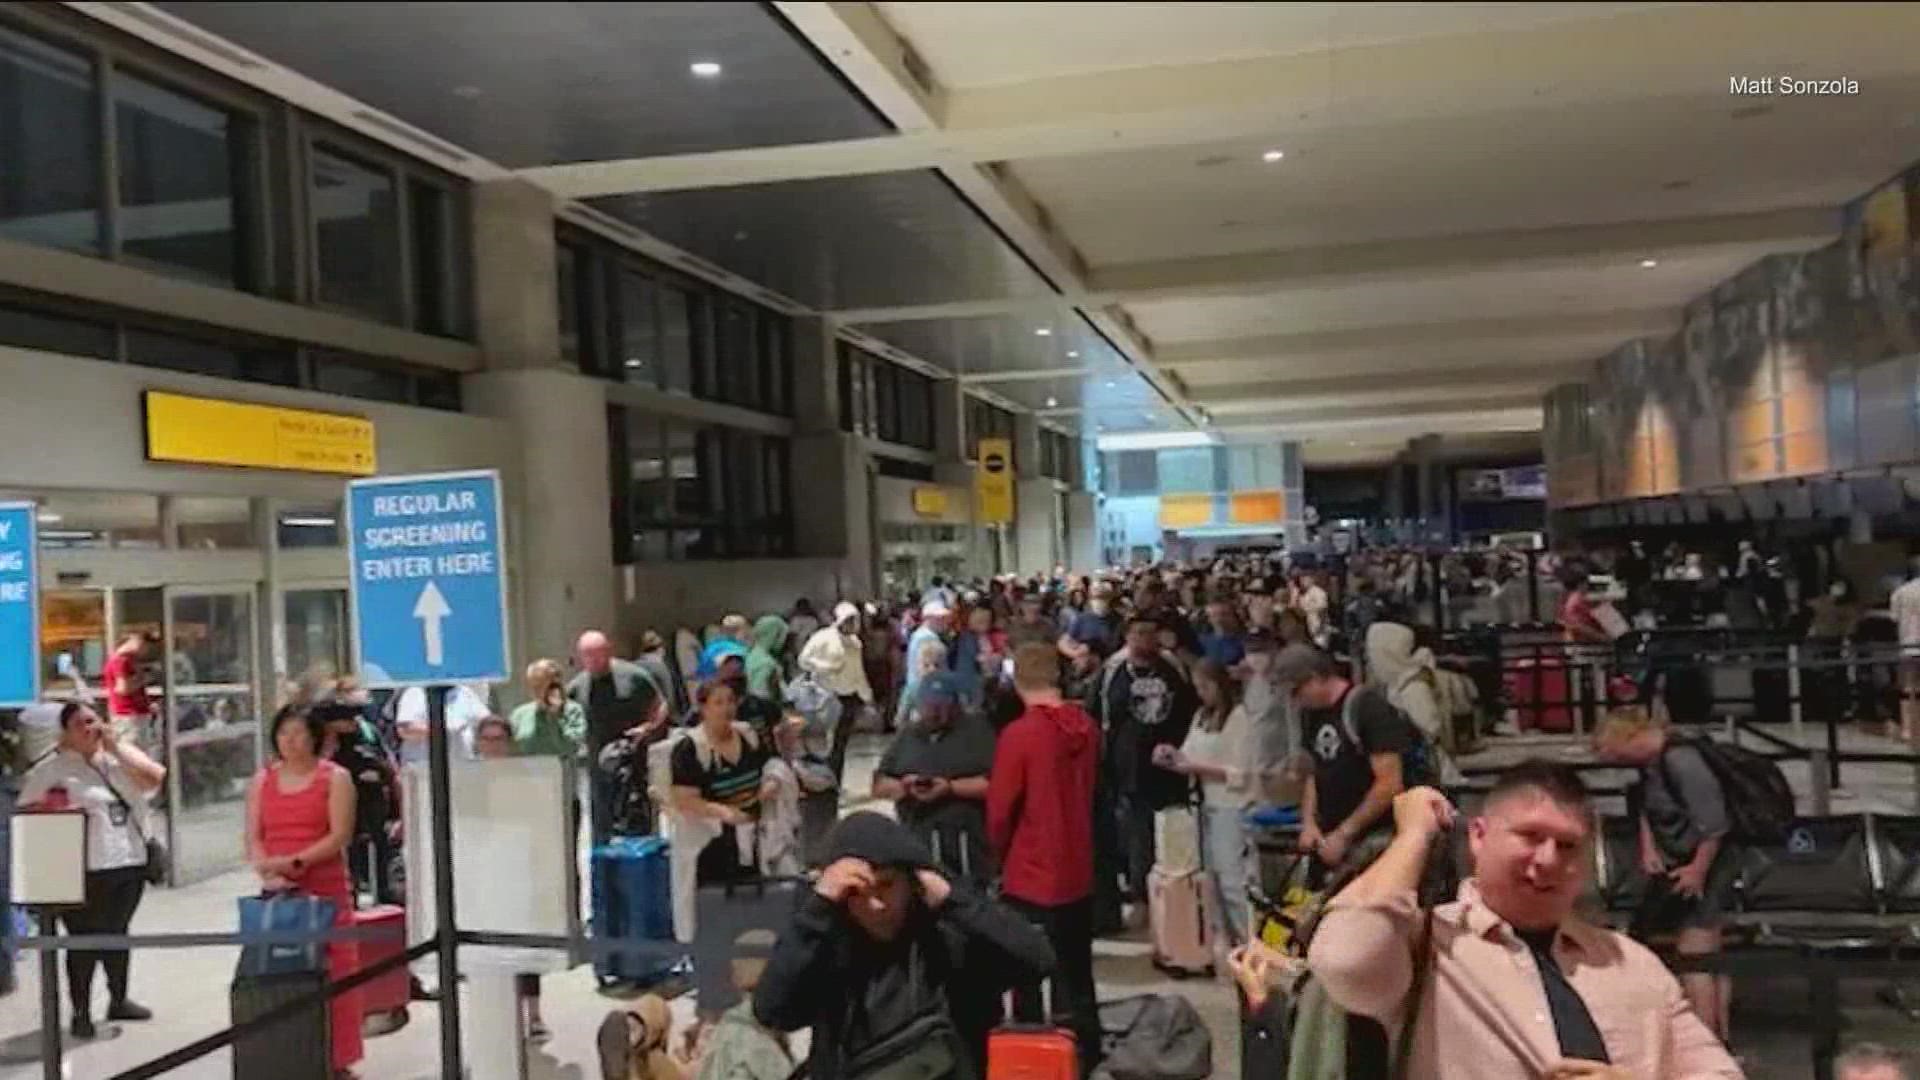 Travelers experienced a power outage at the Austin airport early Wednesday morning. But fliers weren't the only ones inconvenienced by the outage.